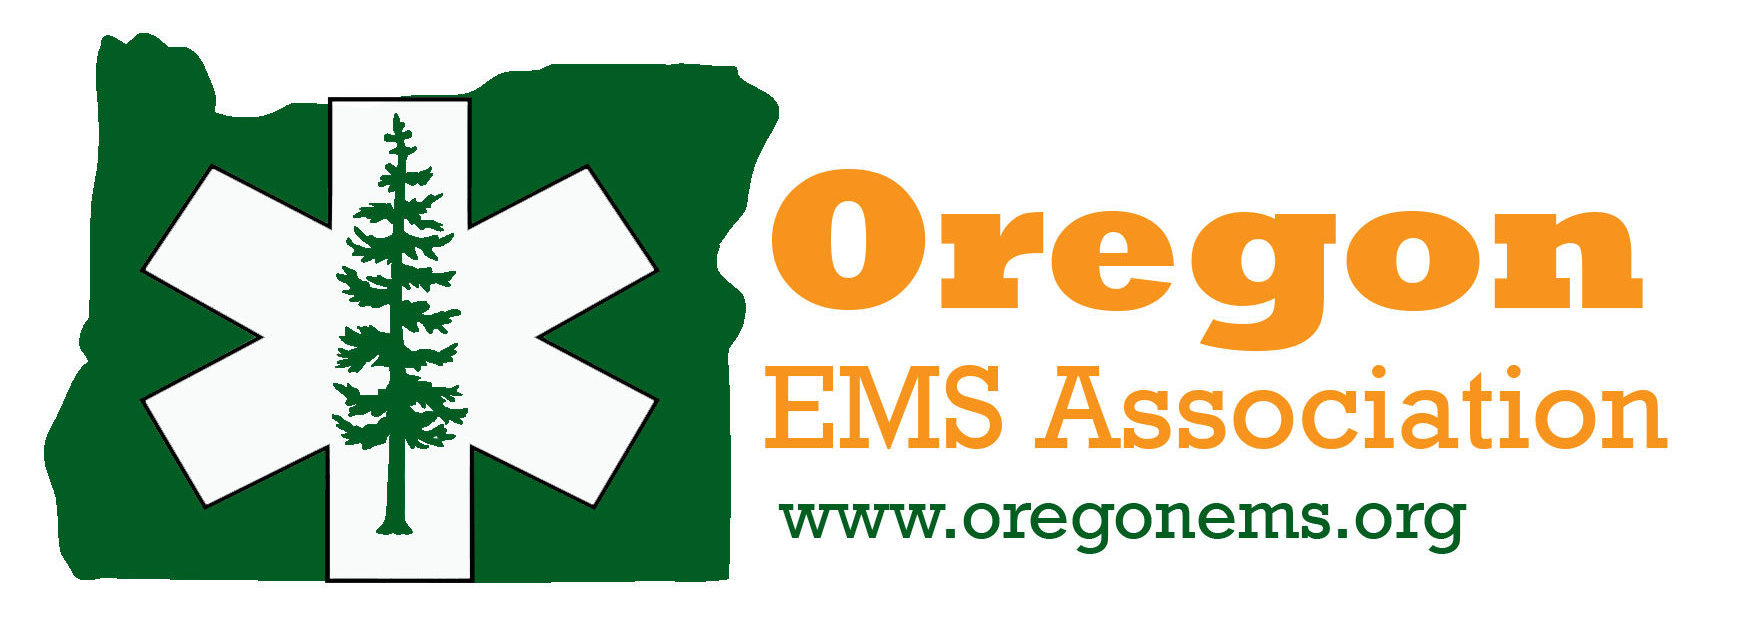 Oregon EMS Association Logo. A green outline of Oregon with the Star of Life with a Douglas Fir tree in the center; the words Oregon EMS Association are written in orange